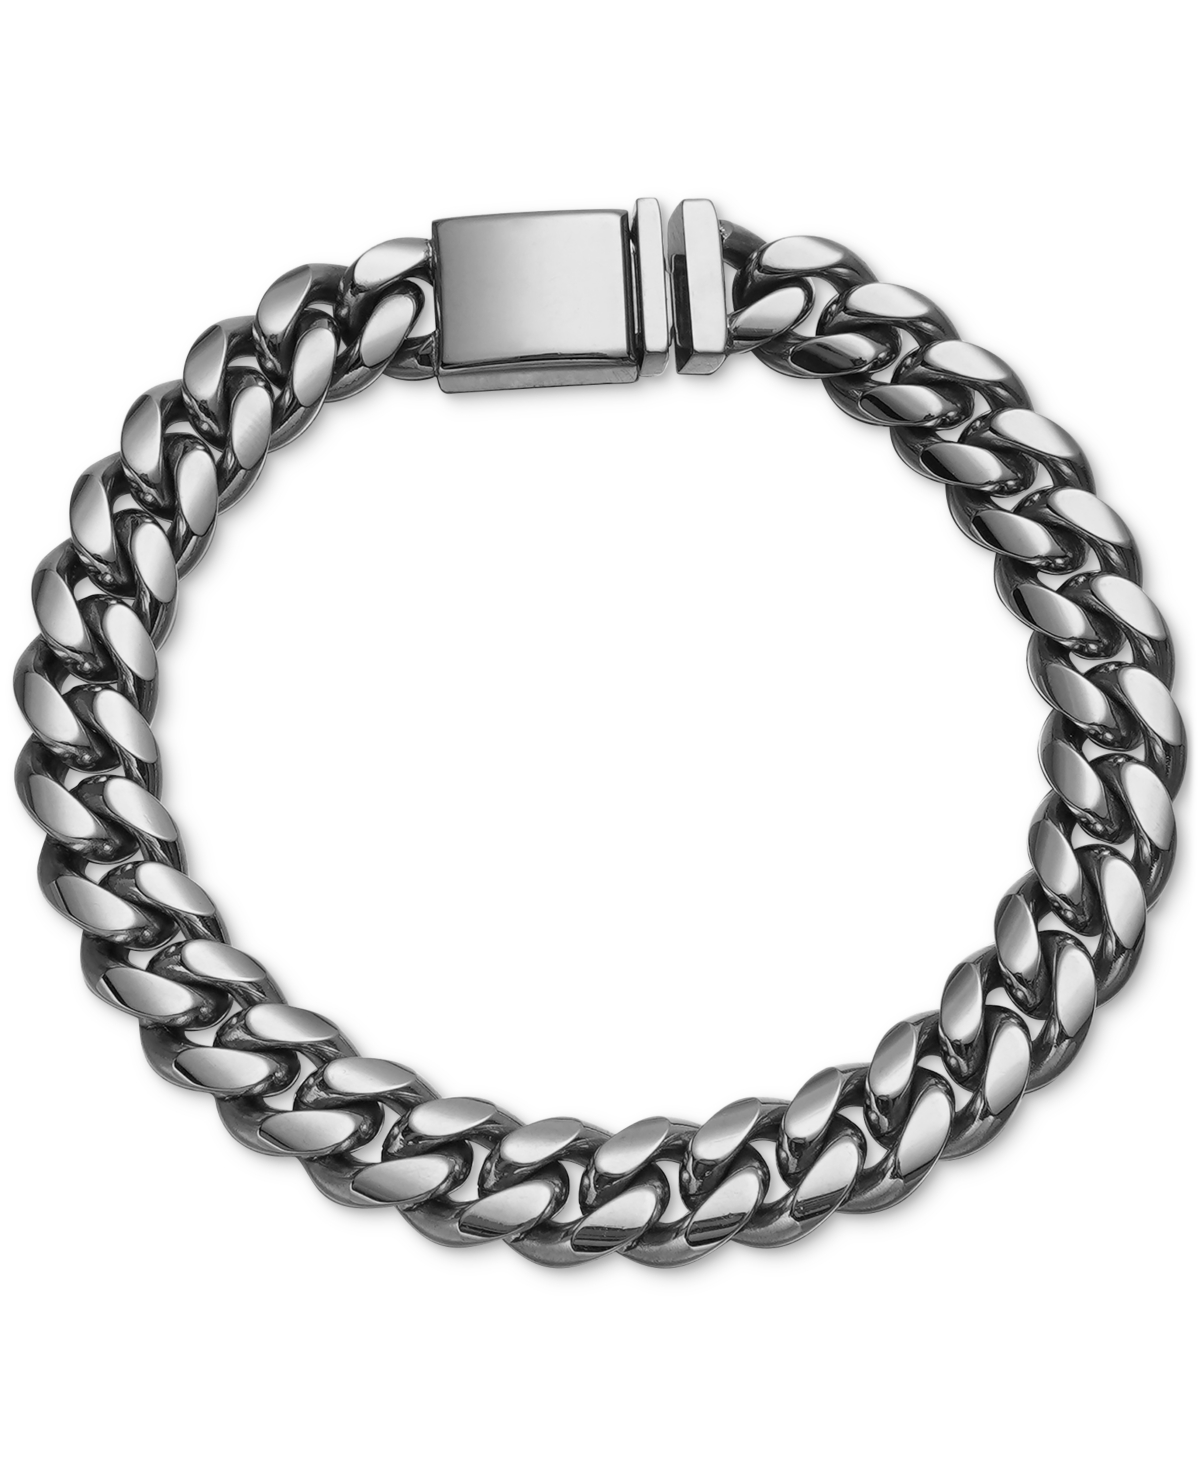 Esquire Men's Jewelry Cuban Link Bracelet In Gold-tone Ion-plated Stainless Steel, Created For Macy's